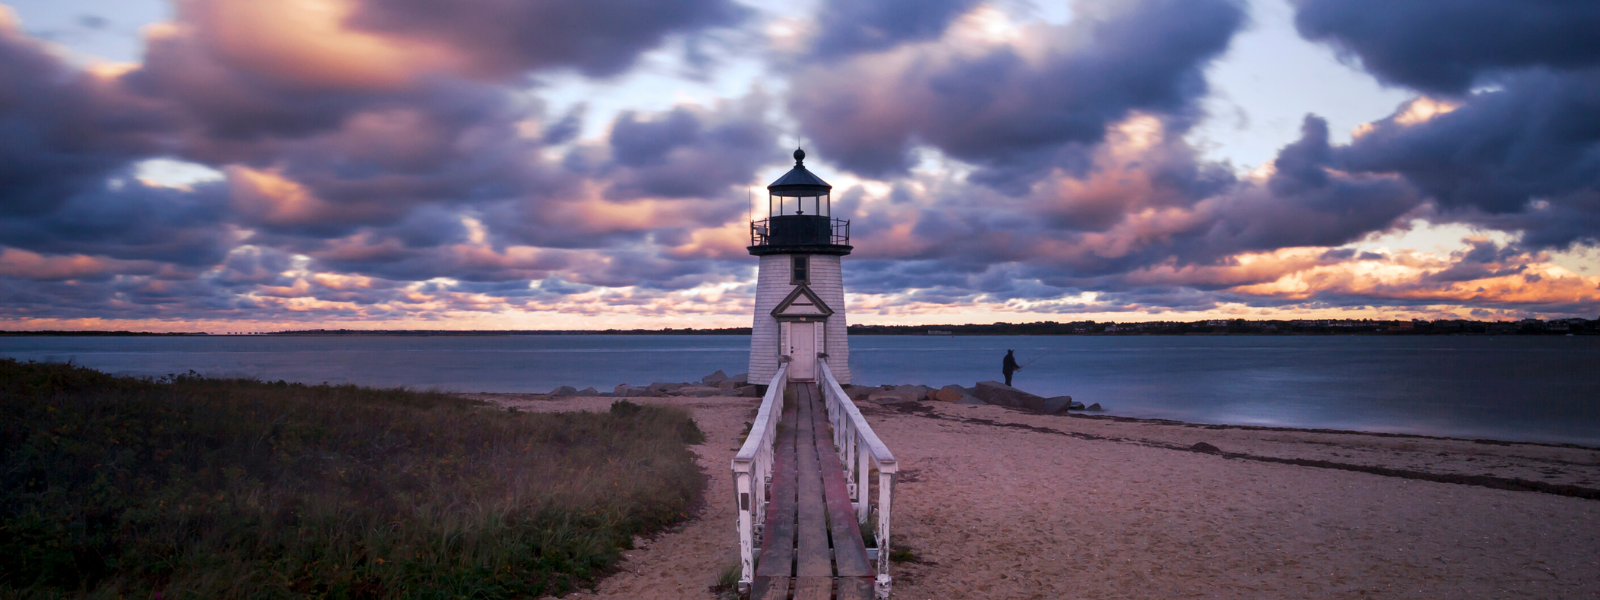 Seasonal Rates are Here! | Save When You Experience Cape Cod in the Off-Season